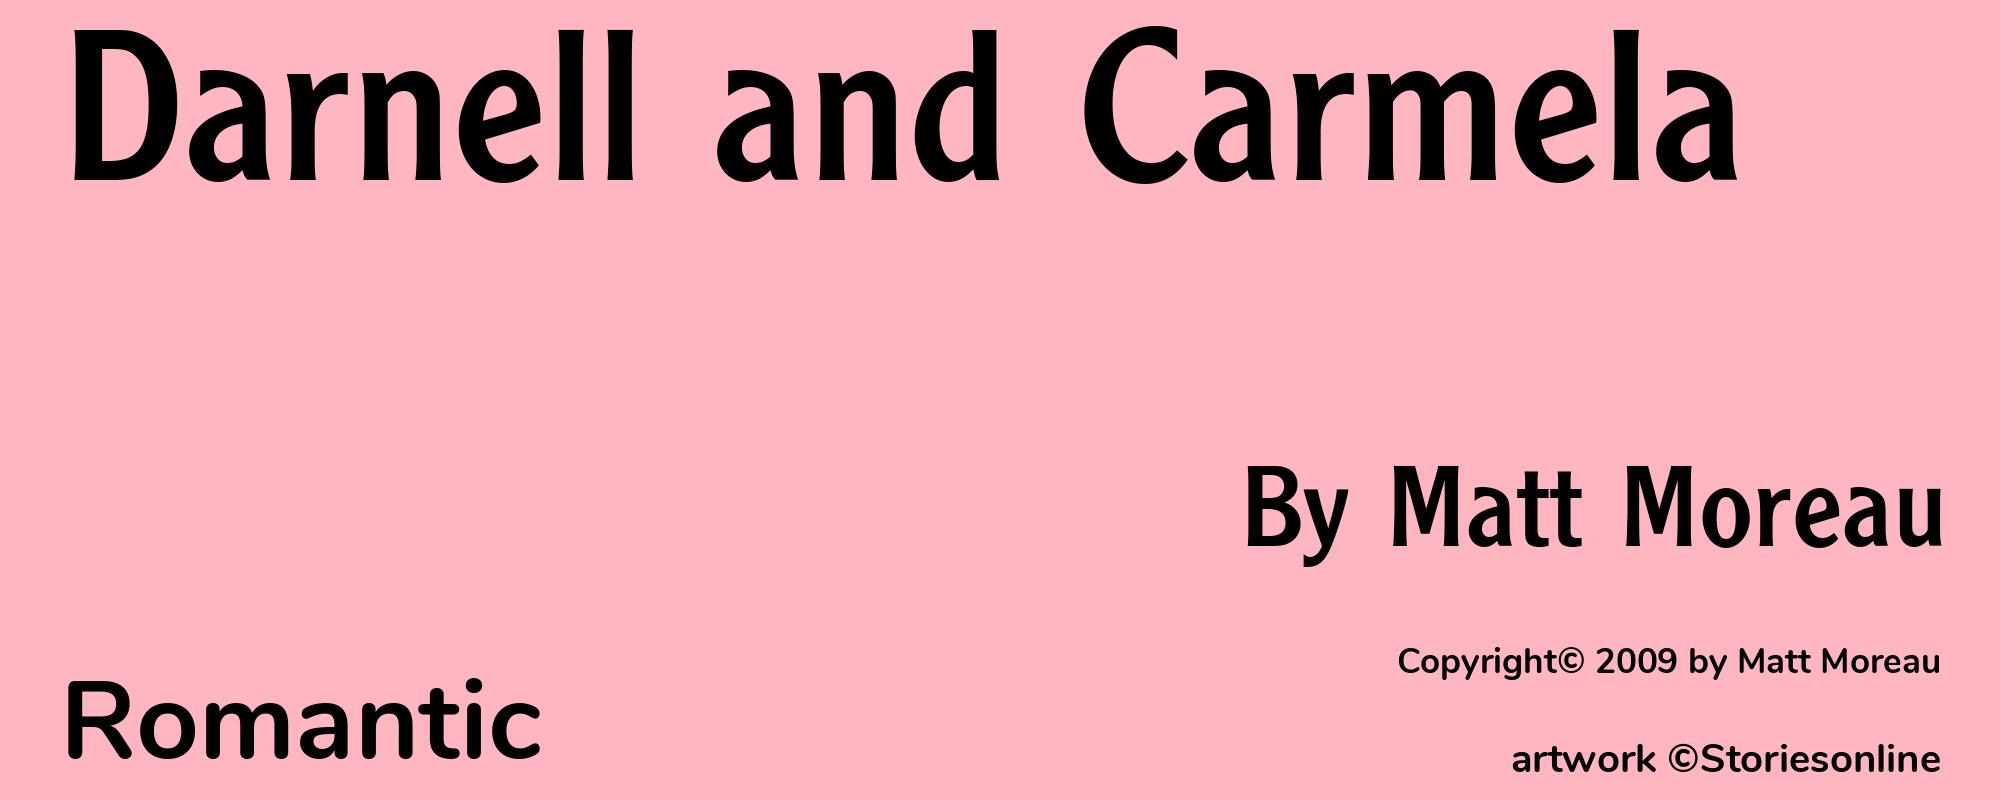 Darnell and Carmela - Cover